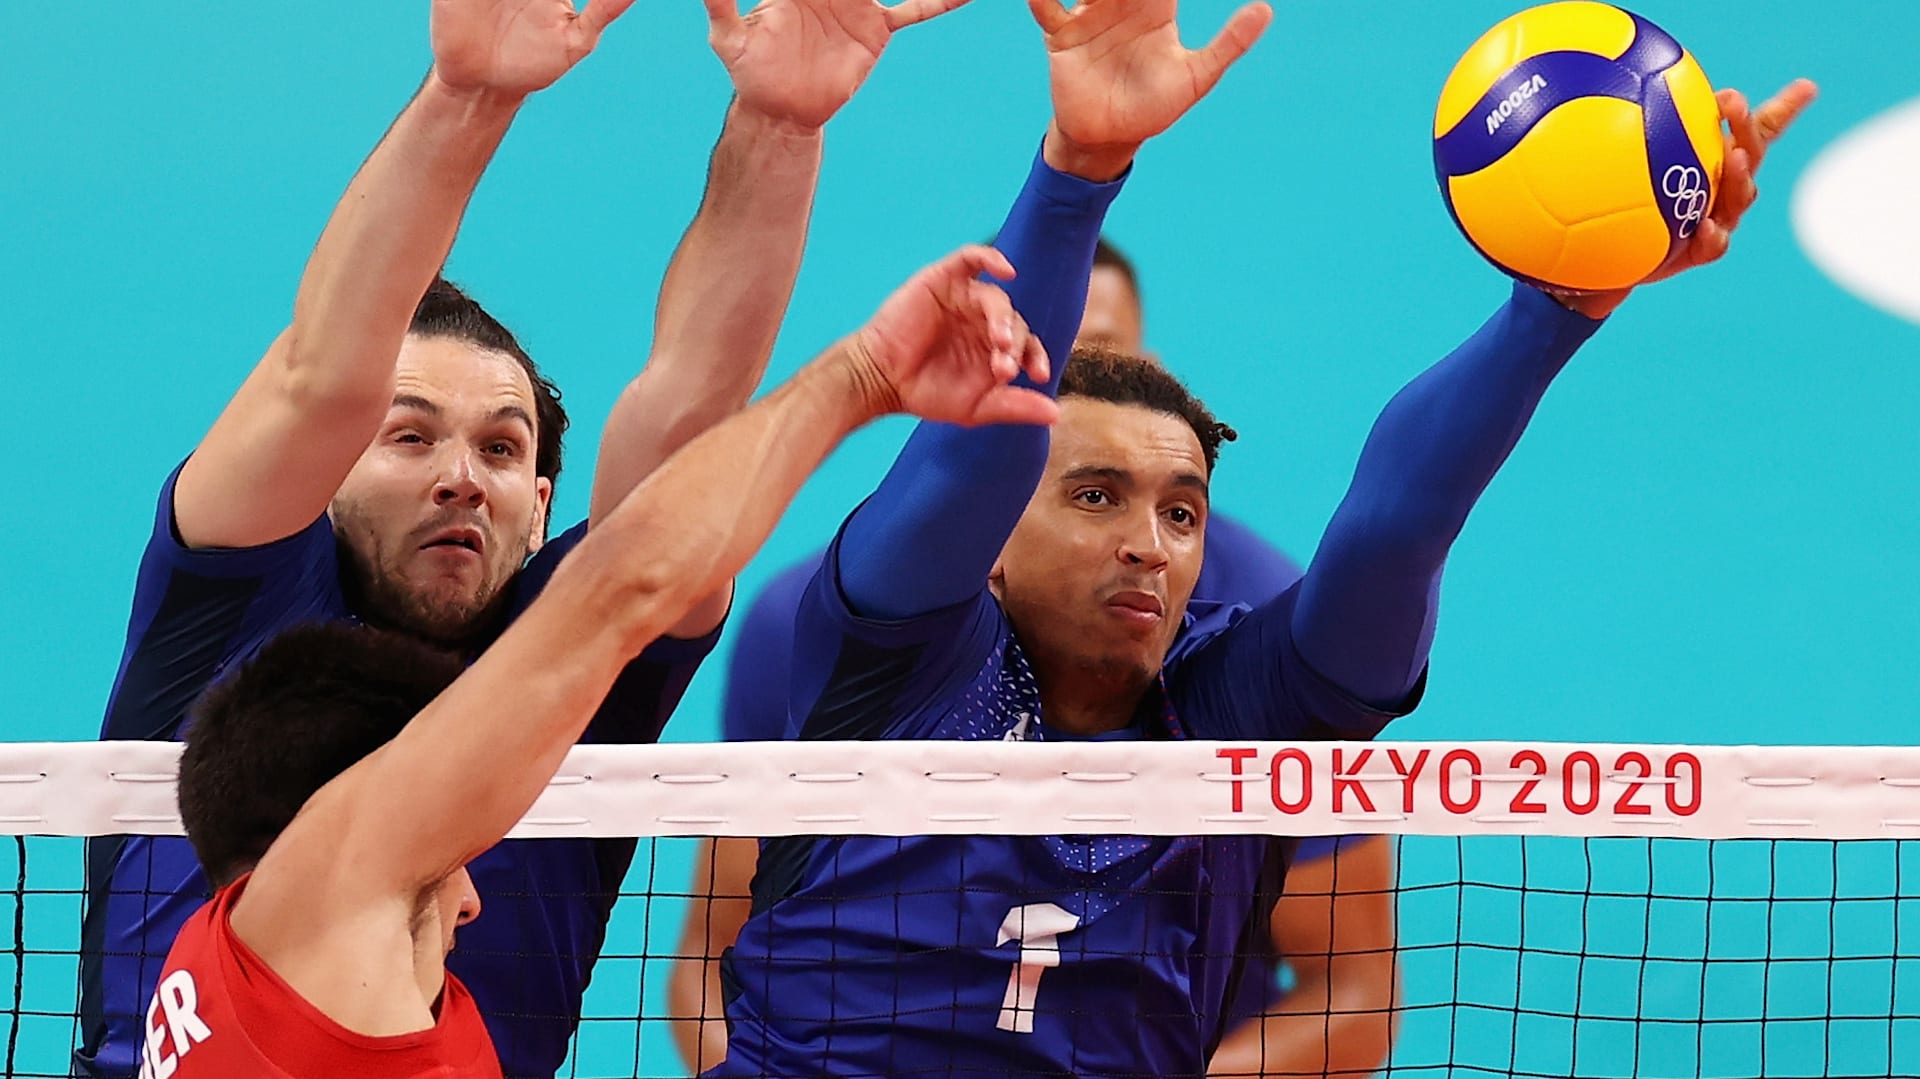 Mens Road to Paris Volleyball Qualifier Groups, venues, schedule and key dates to watch live action